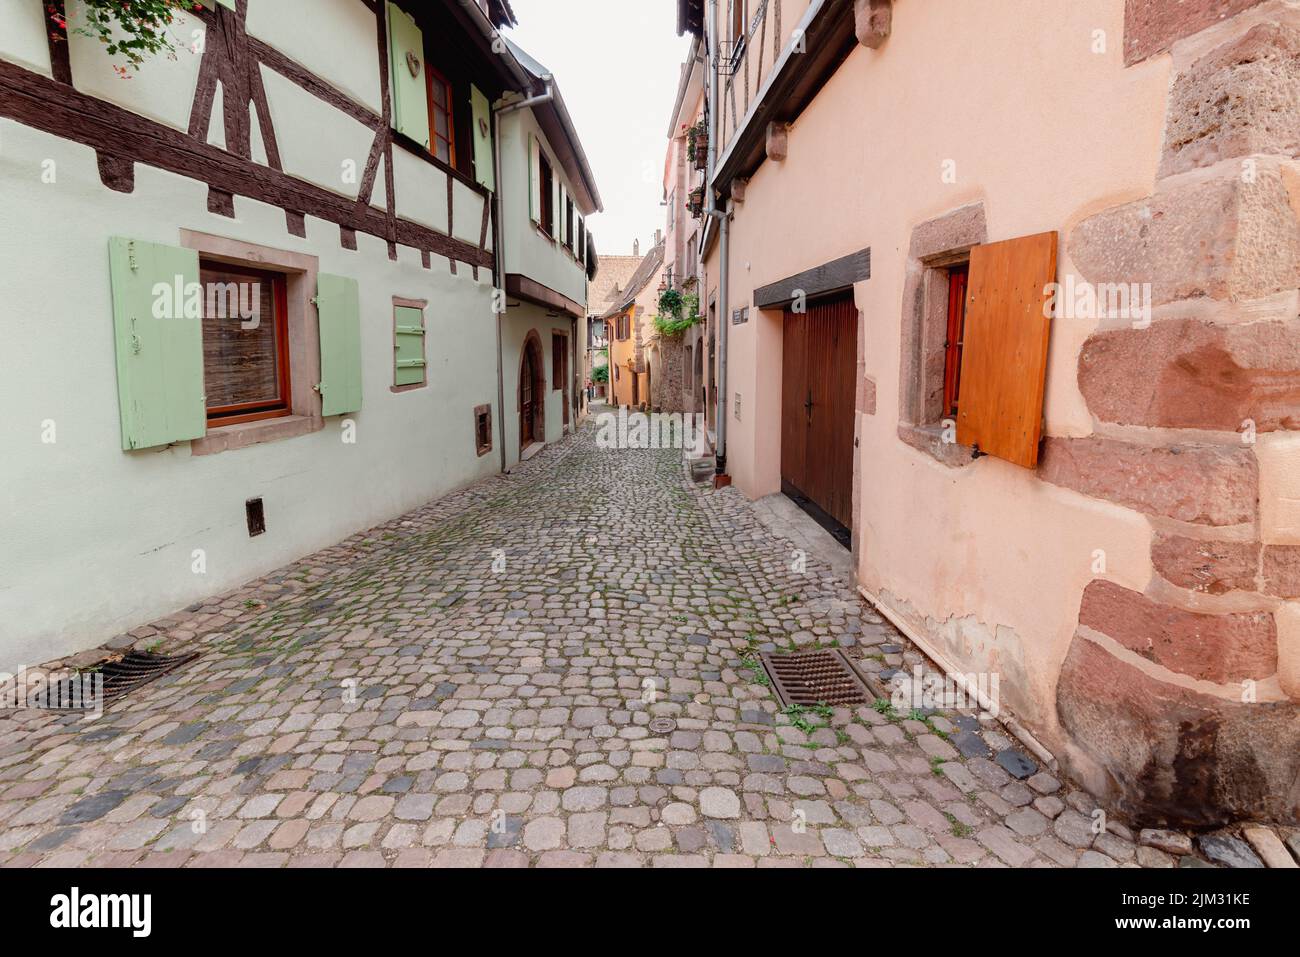 Old buildings in Eguisheim, France.  Stock Photo